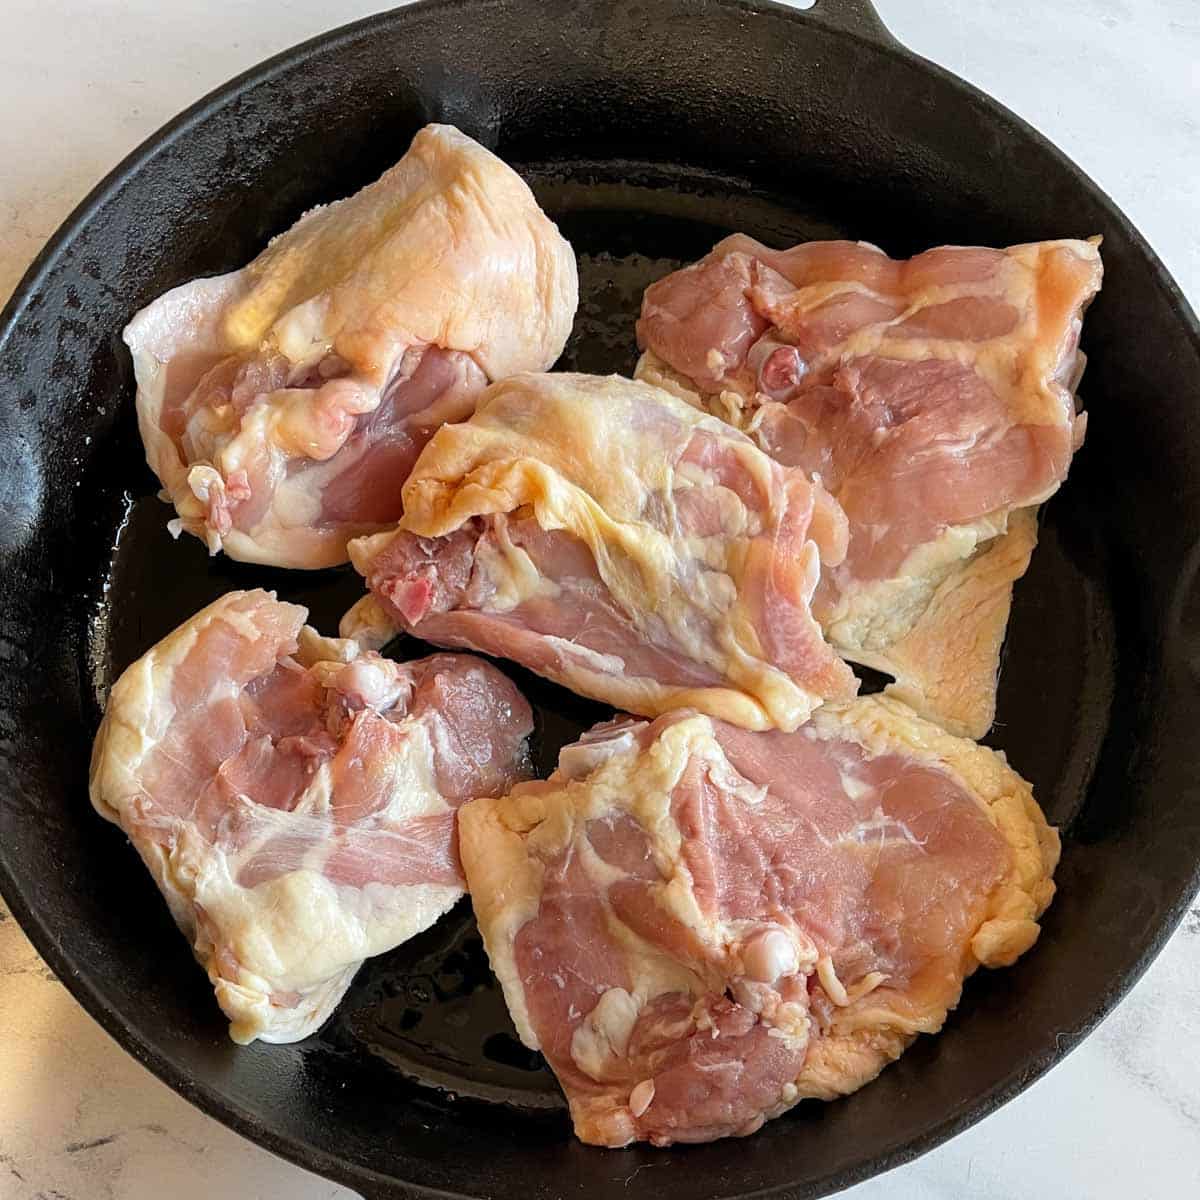 Five raw chicken thighs are shown skin side down in a black cast iron pan.